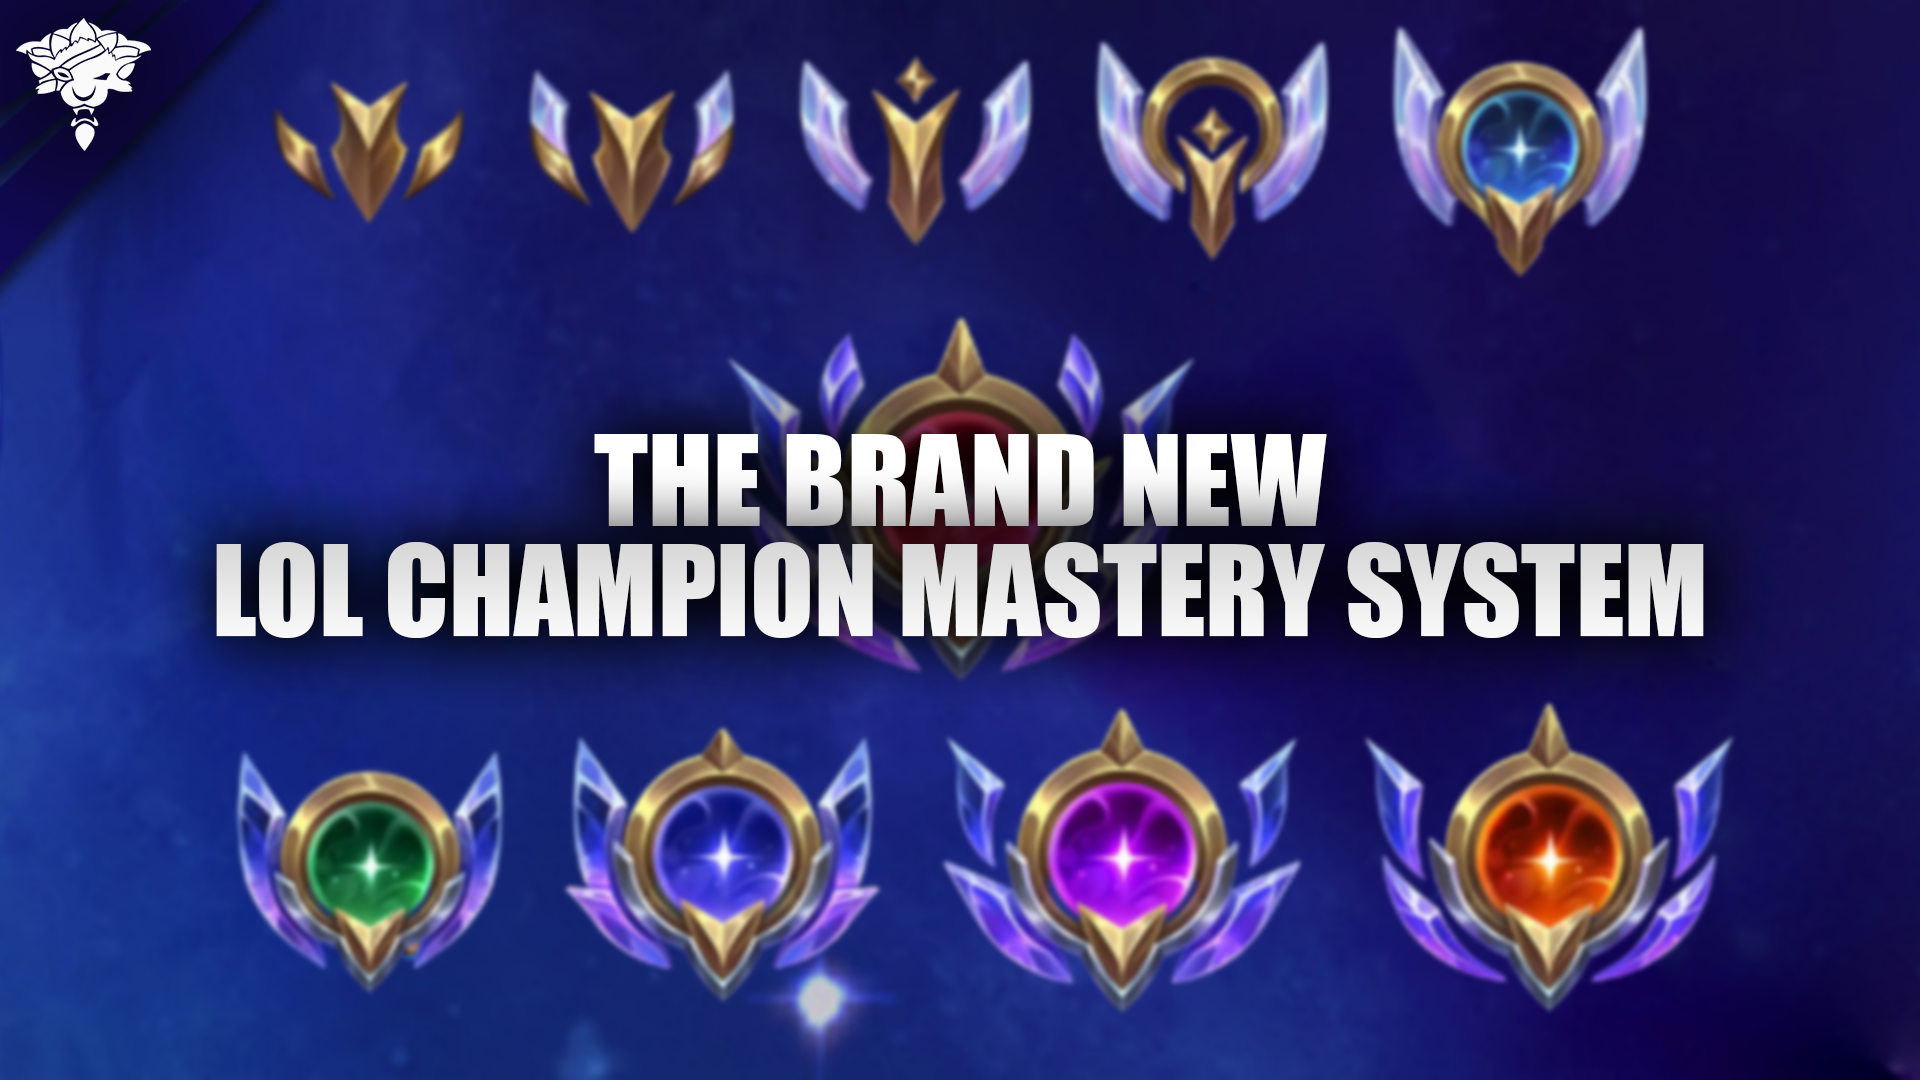 The Brand New LoL Champion Mastery System